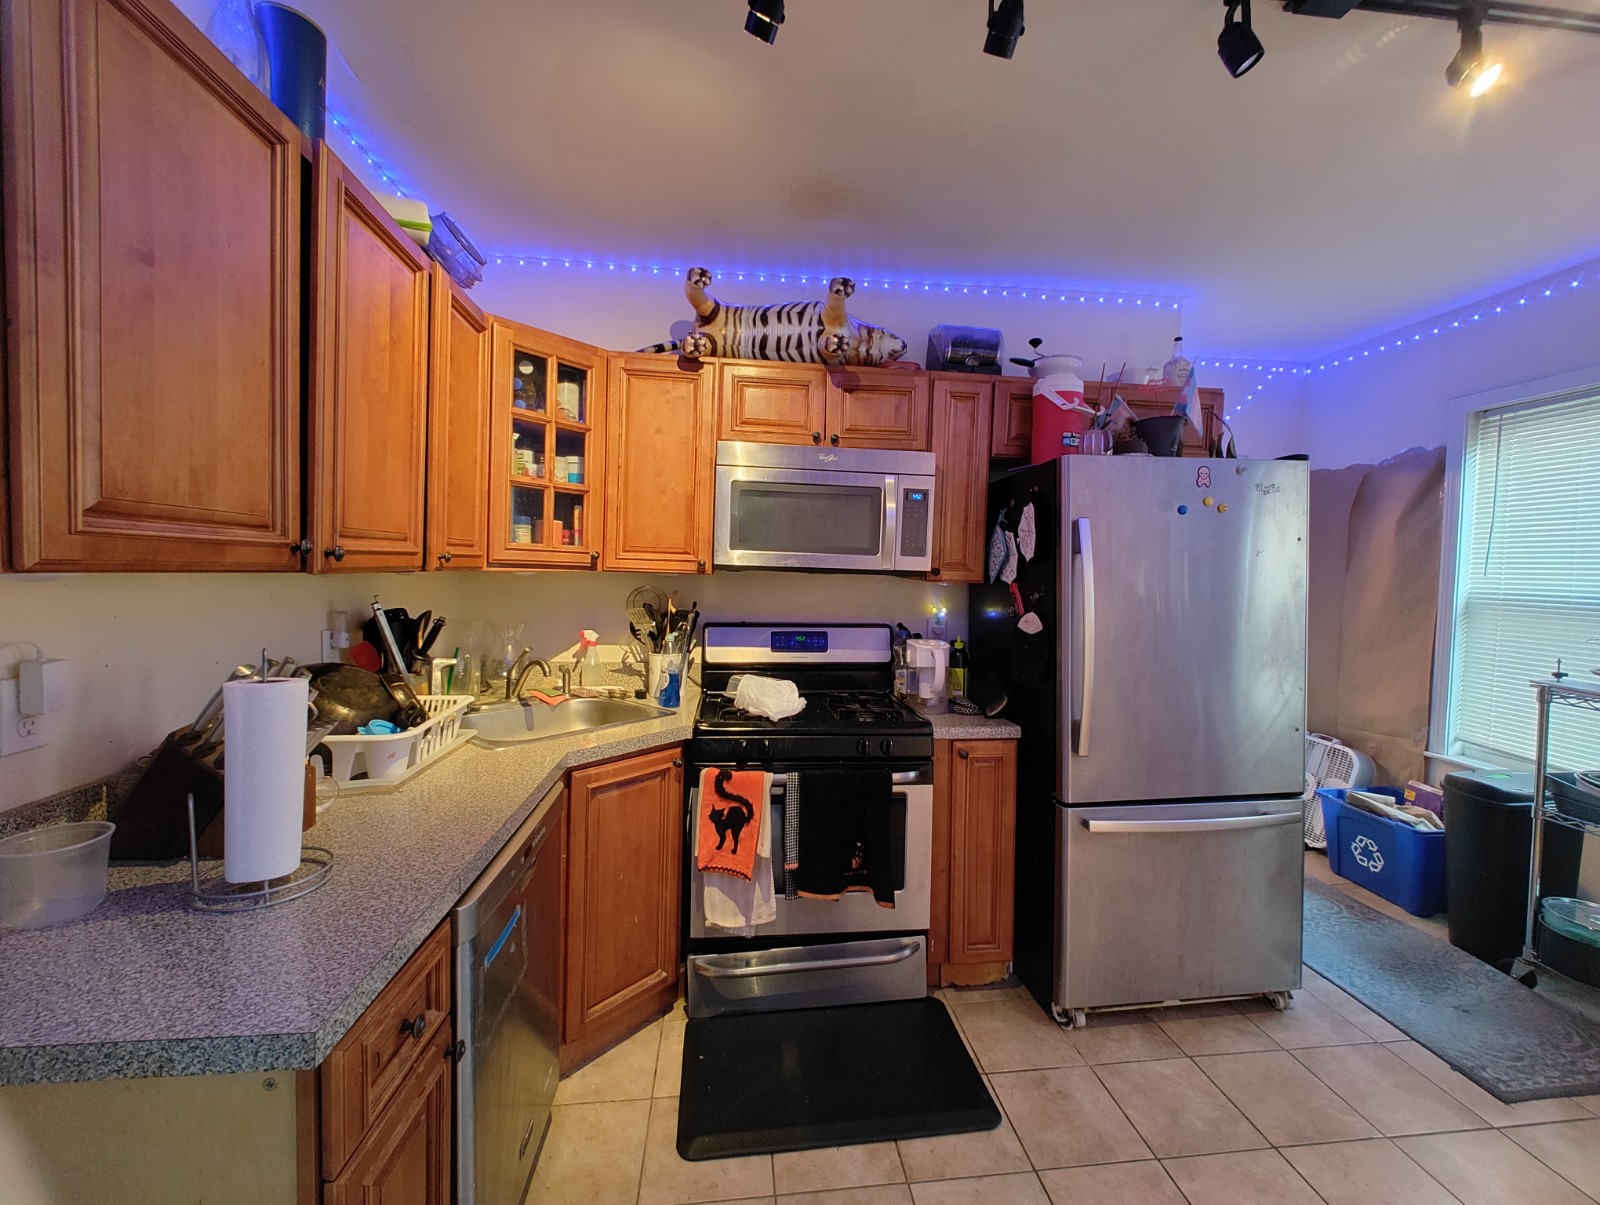 Photos of apartment on Winter Hill Rd.,Medford MA 02155